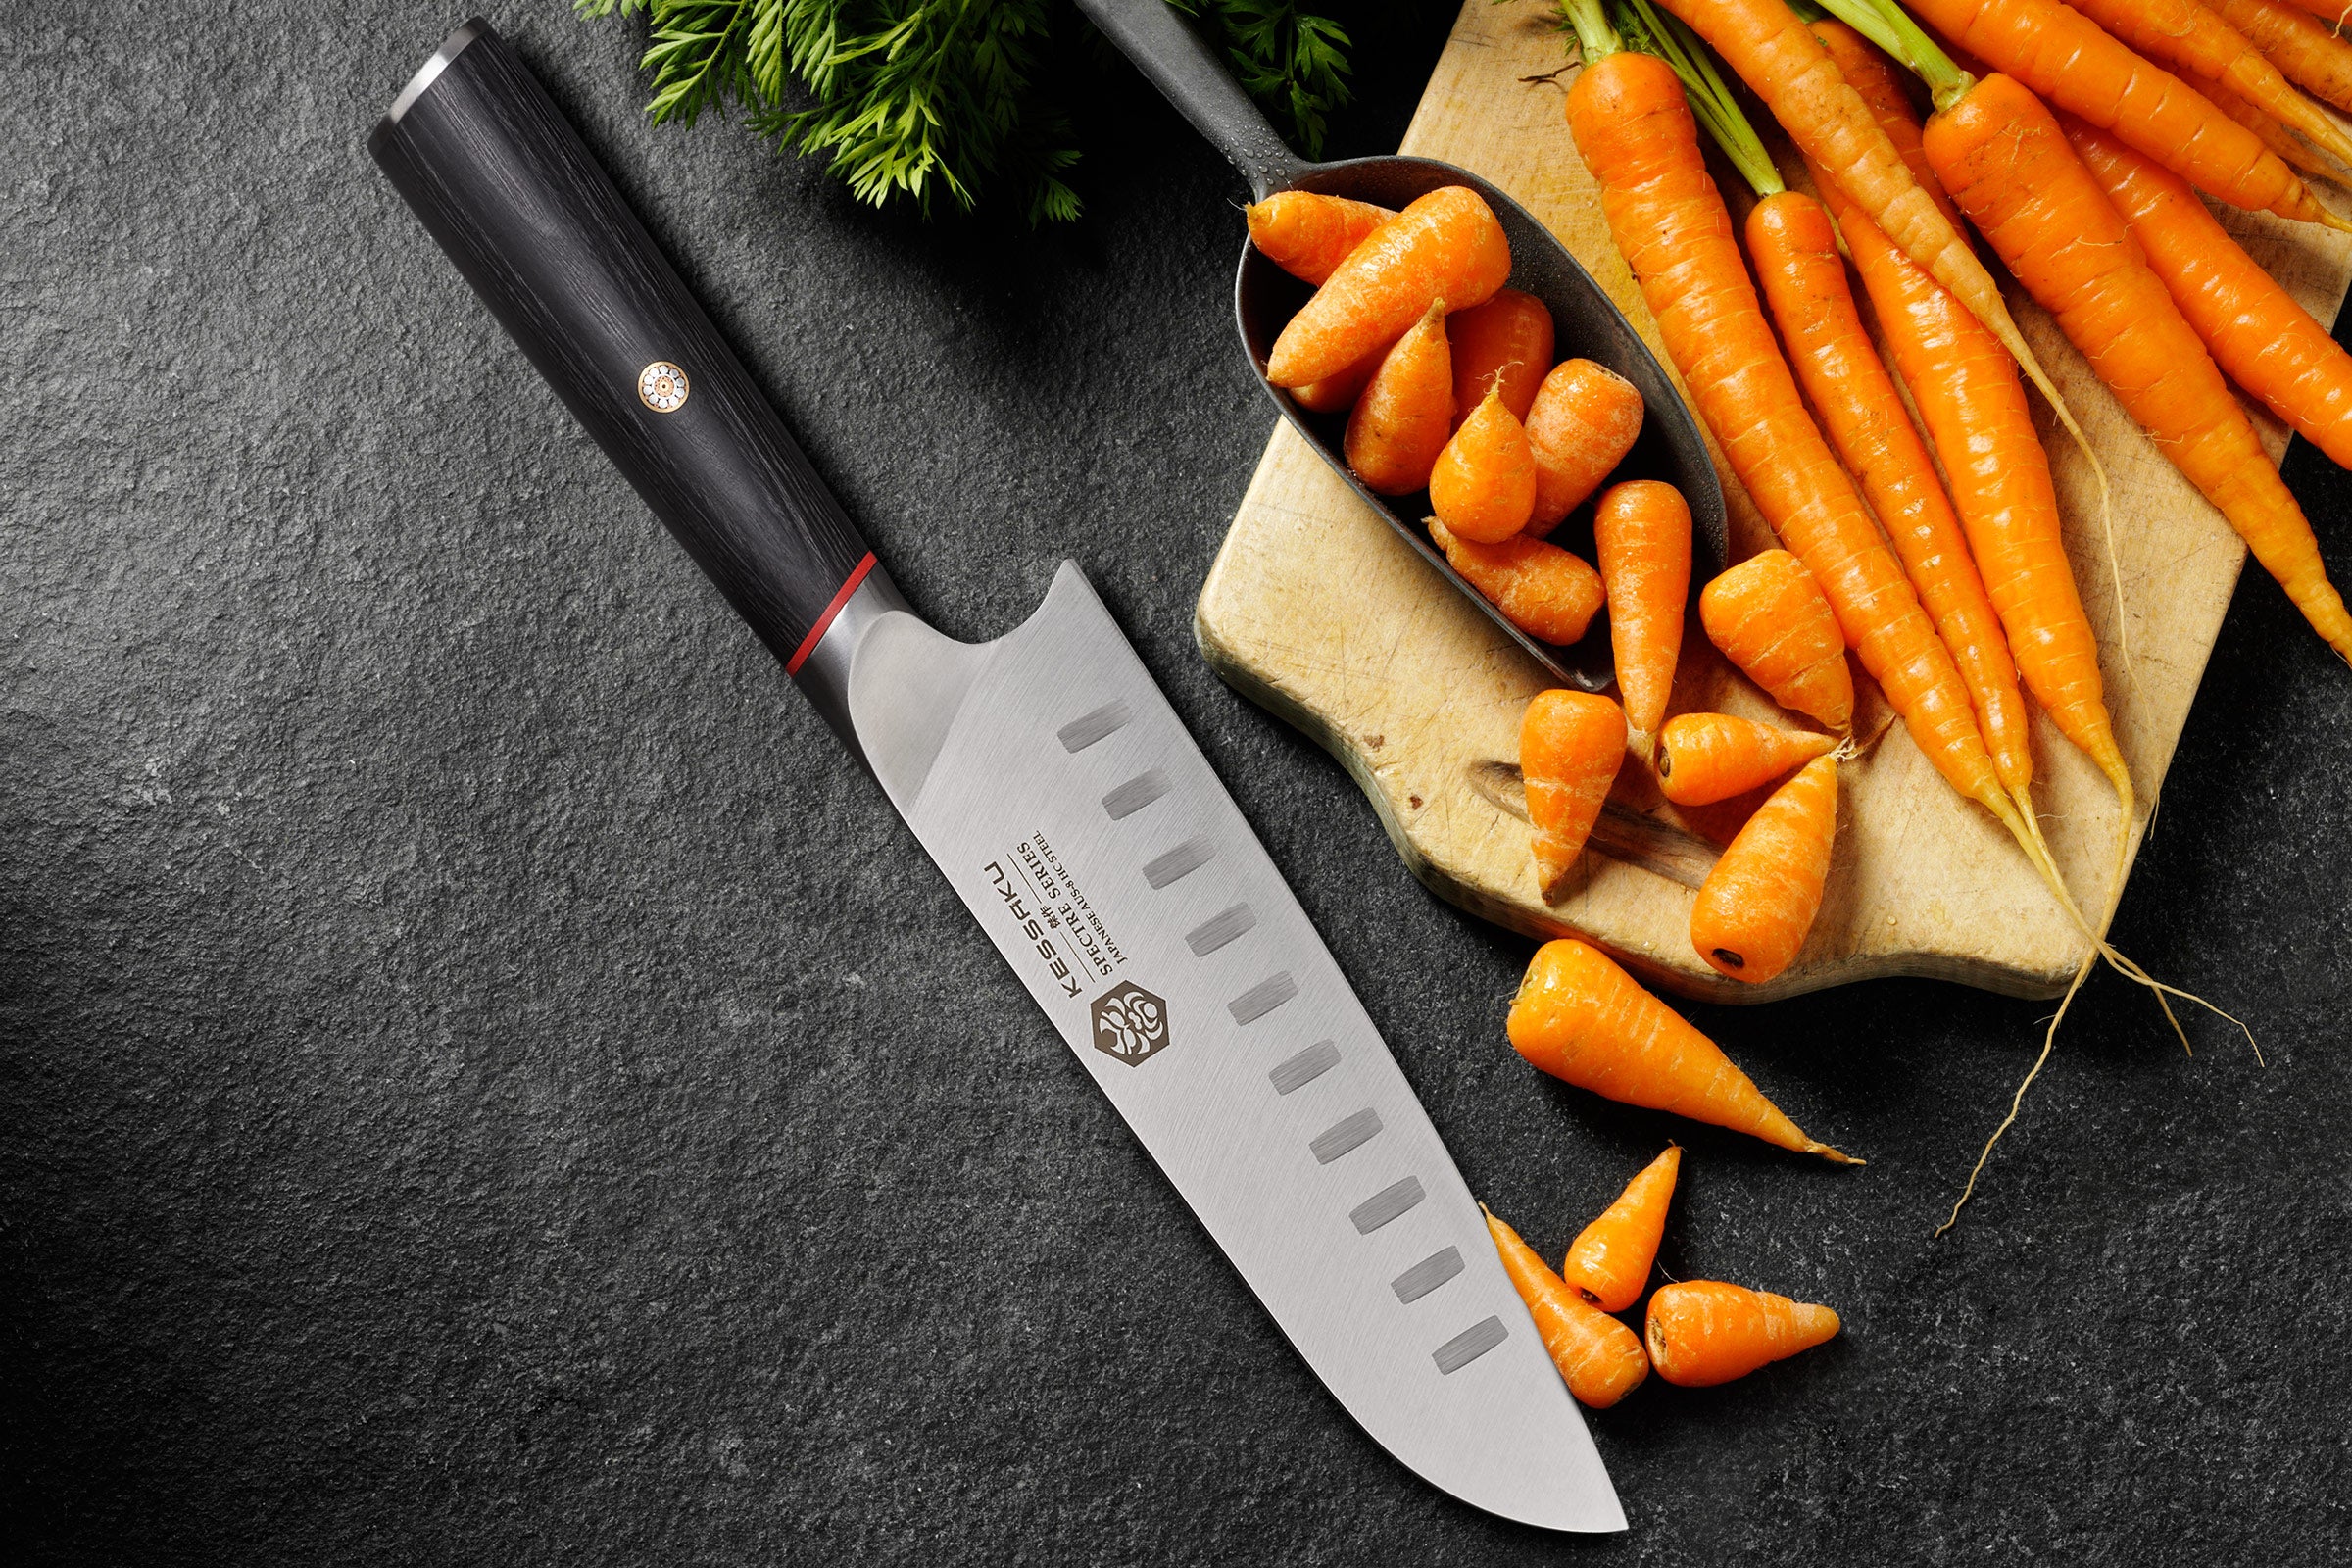 The Spectre Santoku ready to peel and slicing a bunch of carrots.